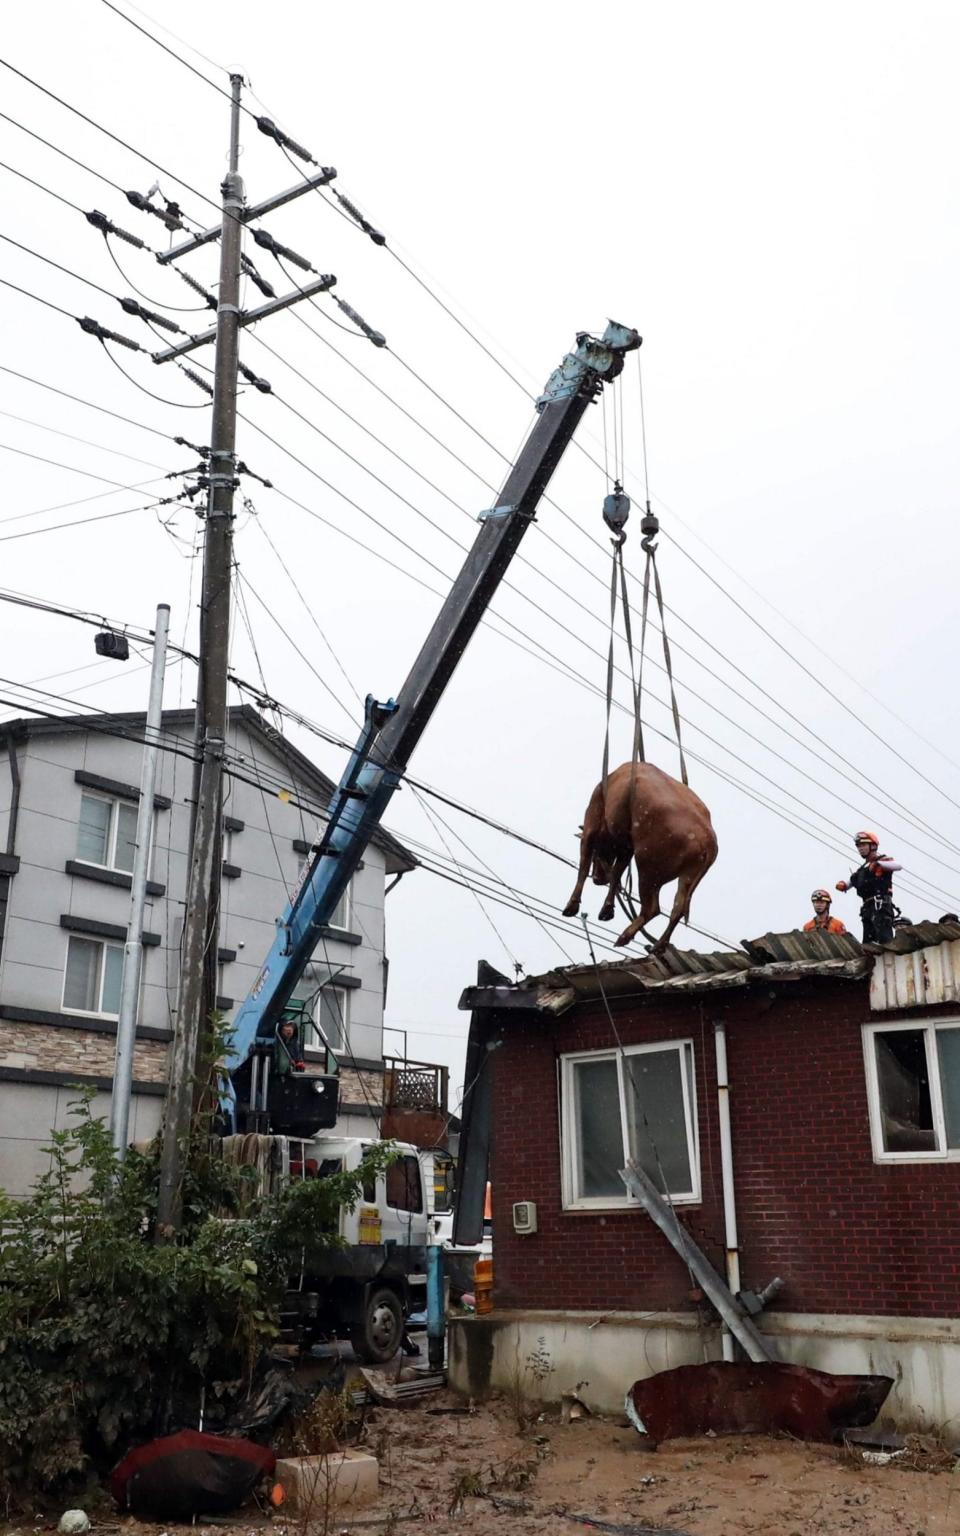 The cows were eventually lifted down by crane - STR/AFP